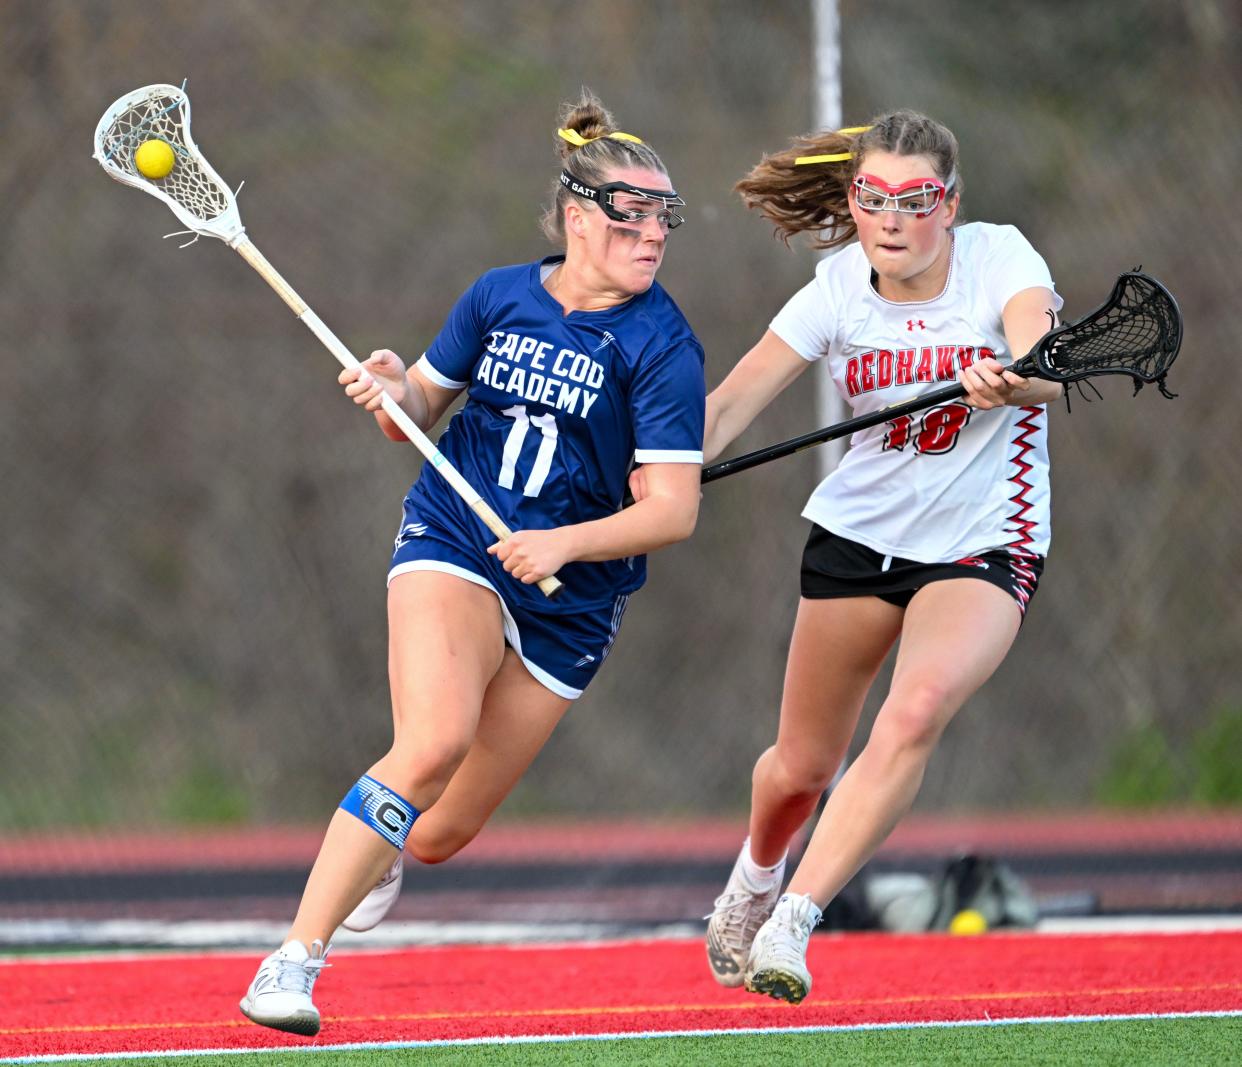 Olivia Powers of Cape Cod Academy moves on Carly Steenstra of Barnstable.